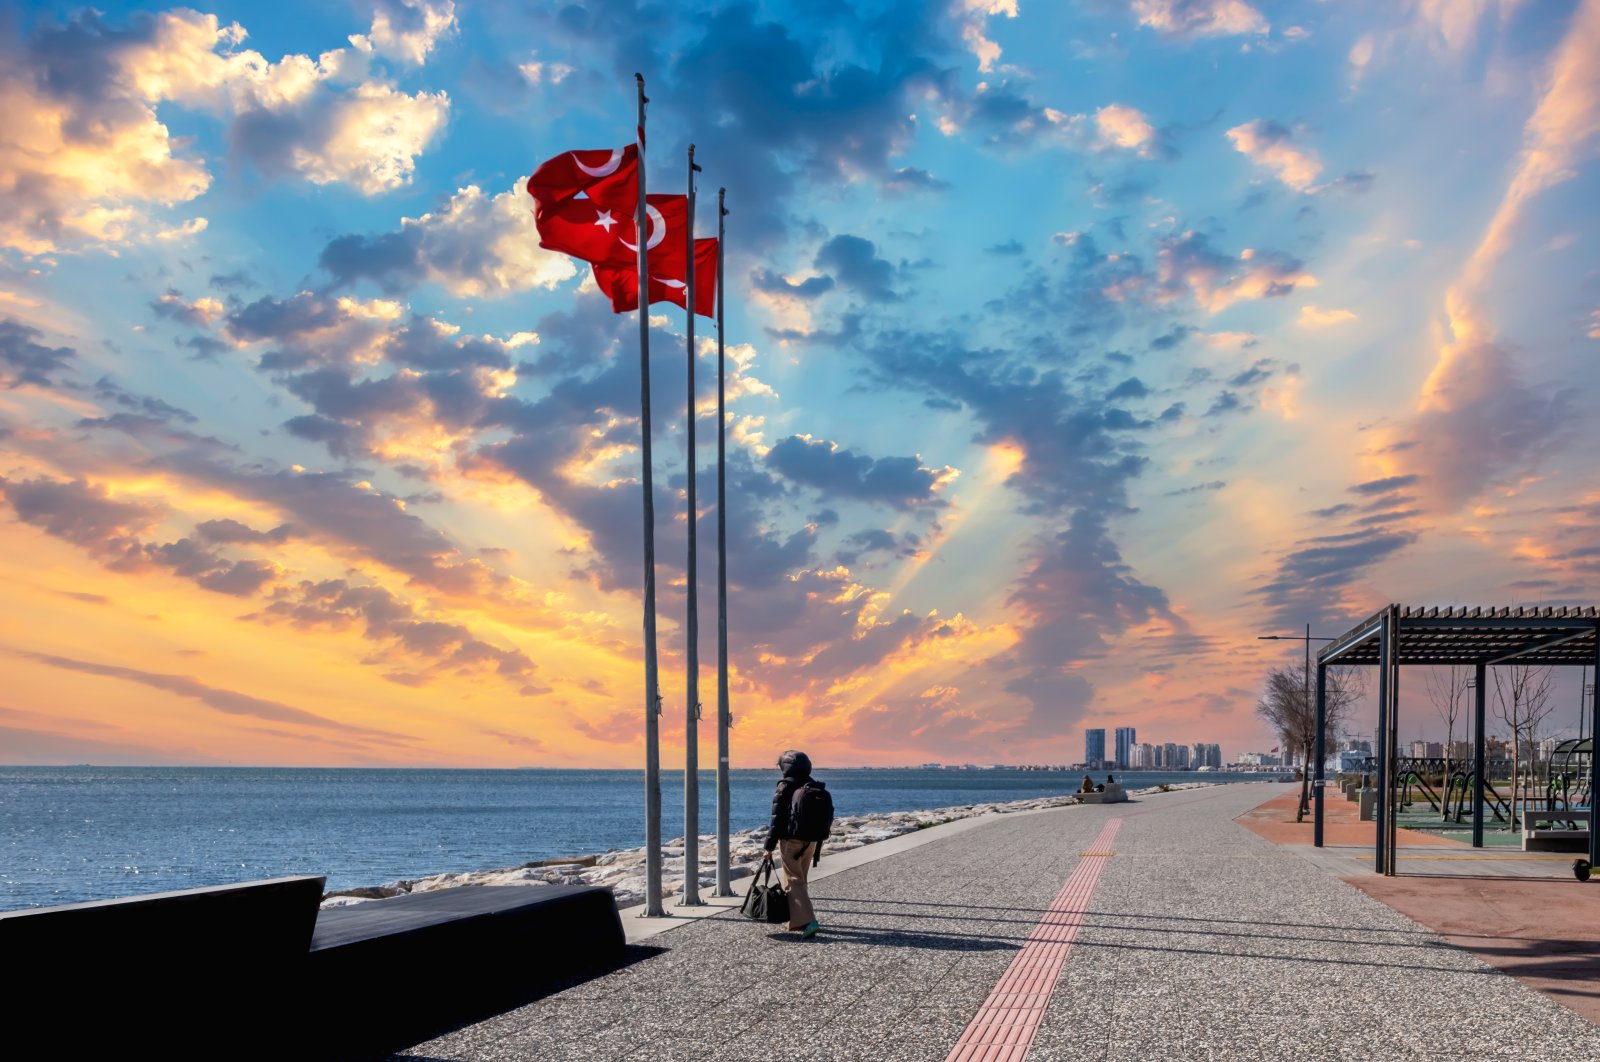 A man standing near waving Turkish flags spends time at the seaside in the Bostanlı district, Izmir, western Turkey, March 18, 2022. (Photo by Shutterstock)